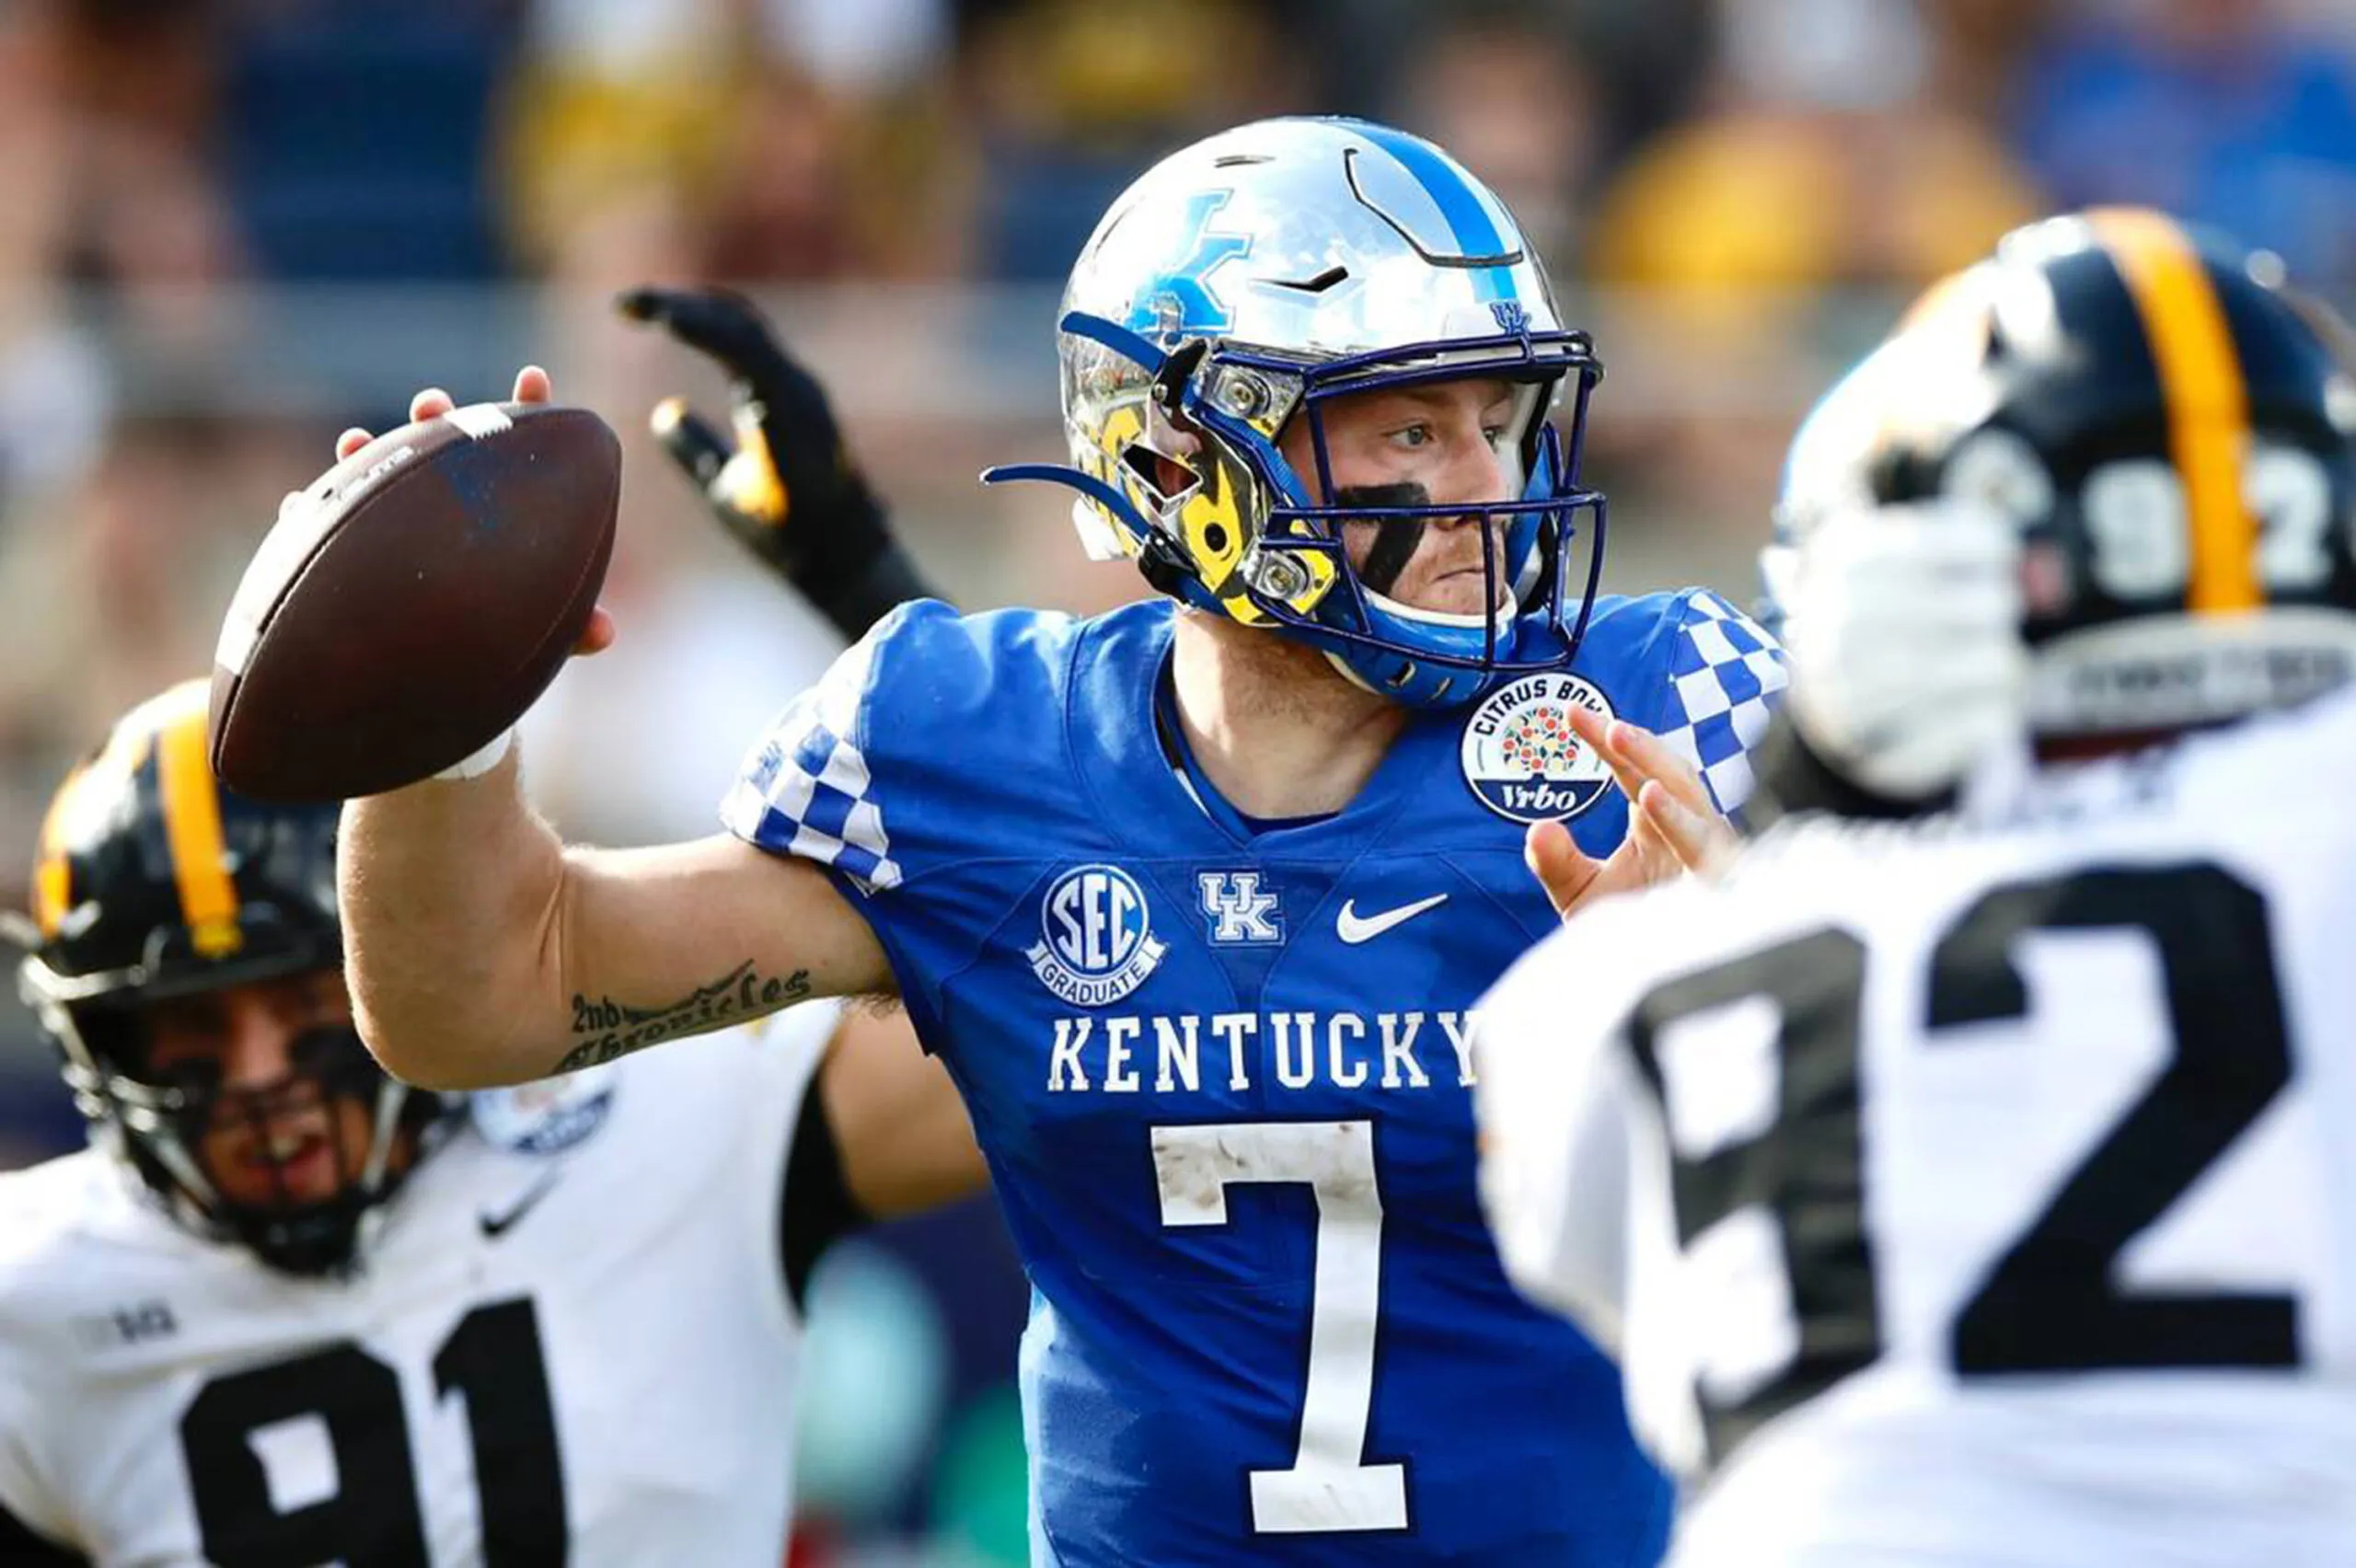 Will Levis has positioned himself to become a high NFL Draft pick in 2023, depending on whom you ask. The Kentucky quarterback has room to grow in terms of passing accuracy, but also possesses the physical tools to do so. (Silas Walker/Lexington Herald-Leader/Tribune News Service via Getty Images)